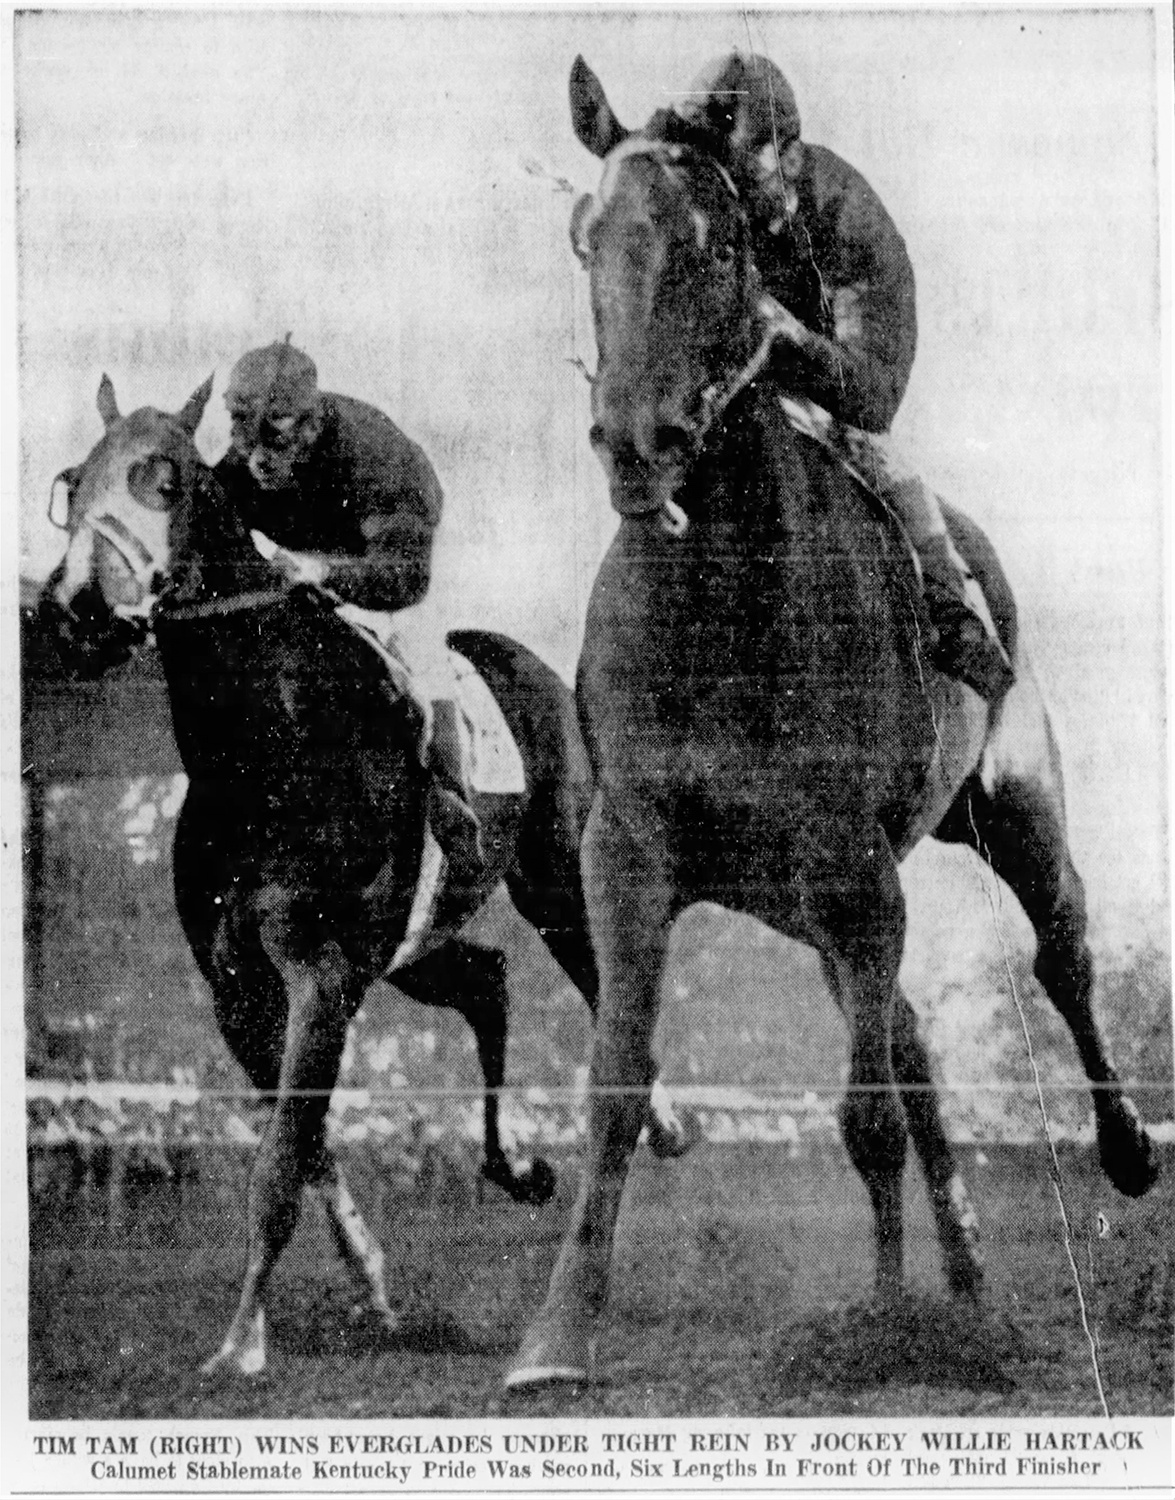 Tim Tam with Bill Hartack up, winning the Everglades Stakes, February 16, 1958. Hartack was looking forward to another record-breaking year at the beginning of 1958. From the Miami News, February 16, 1958.